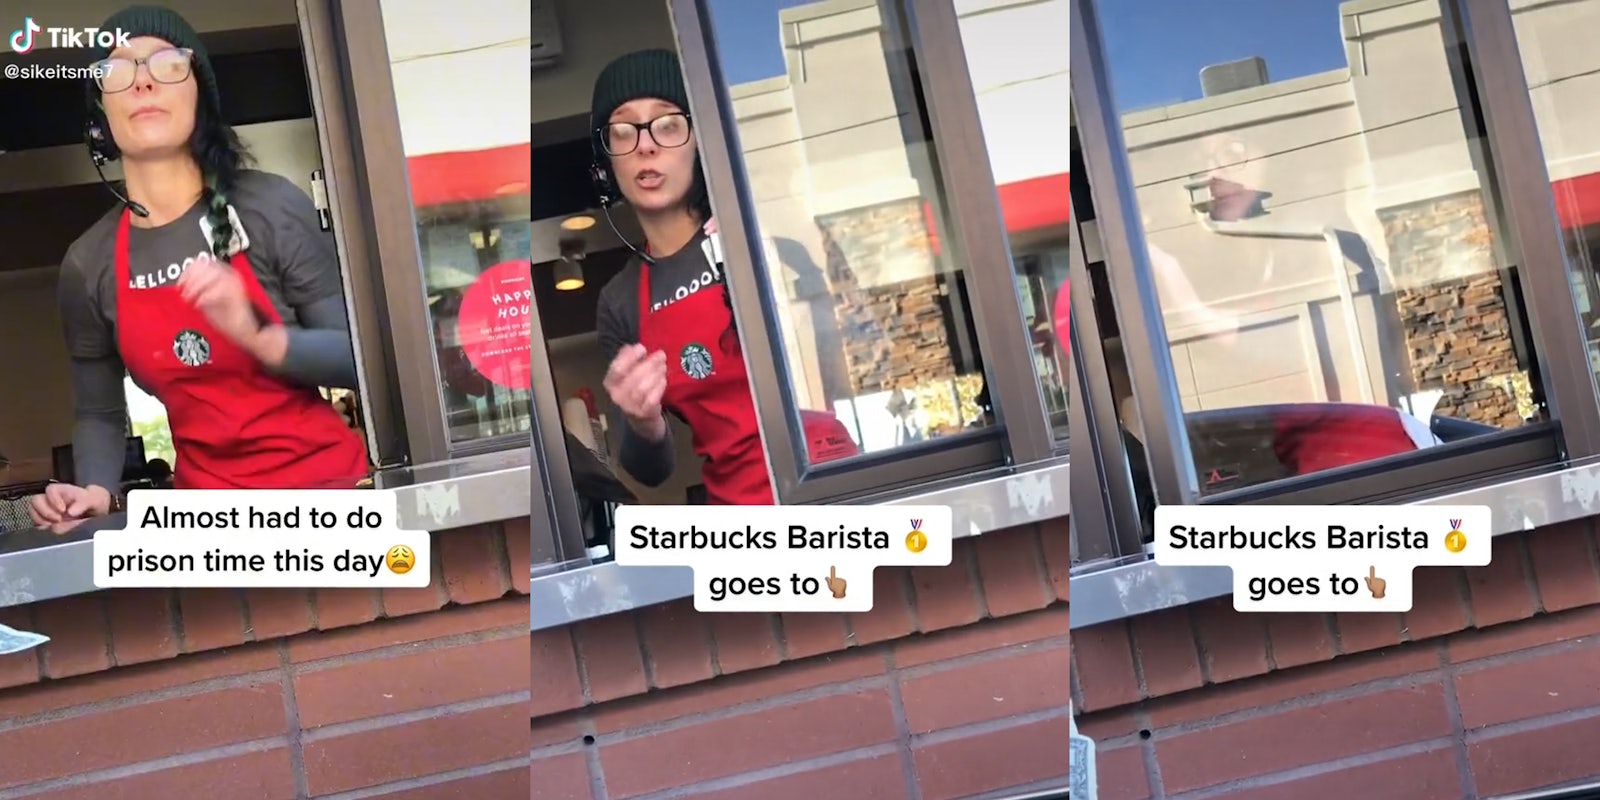 starbucks employee in drive thru with captions 'Almost had to do prison time this day' and 'Starbucks Barista gold medal goes to'